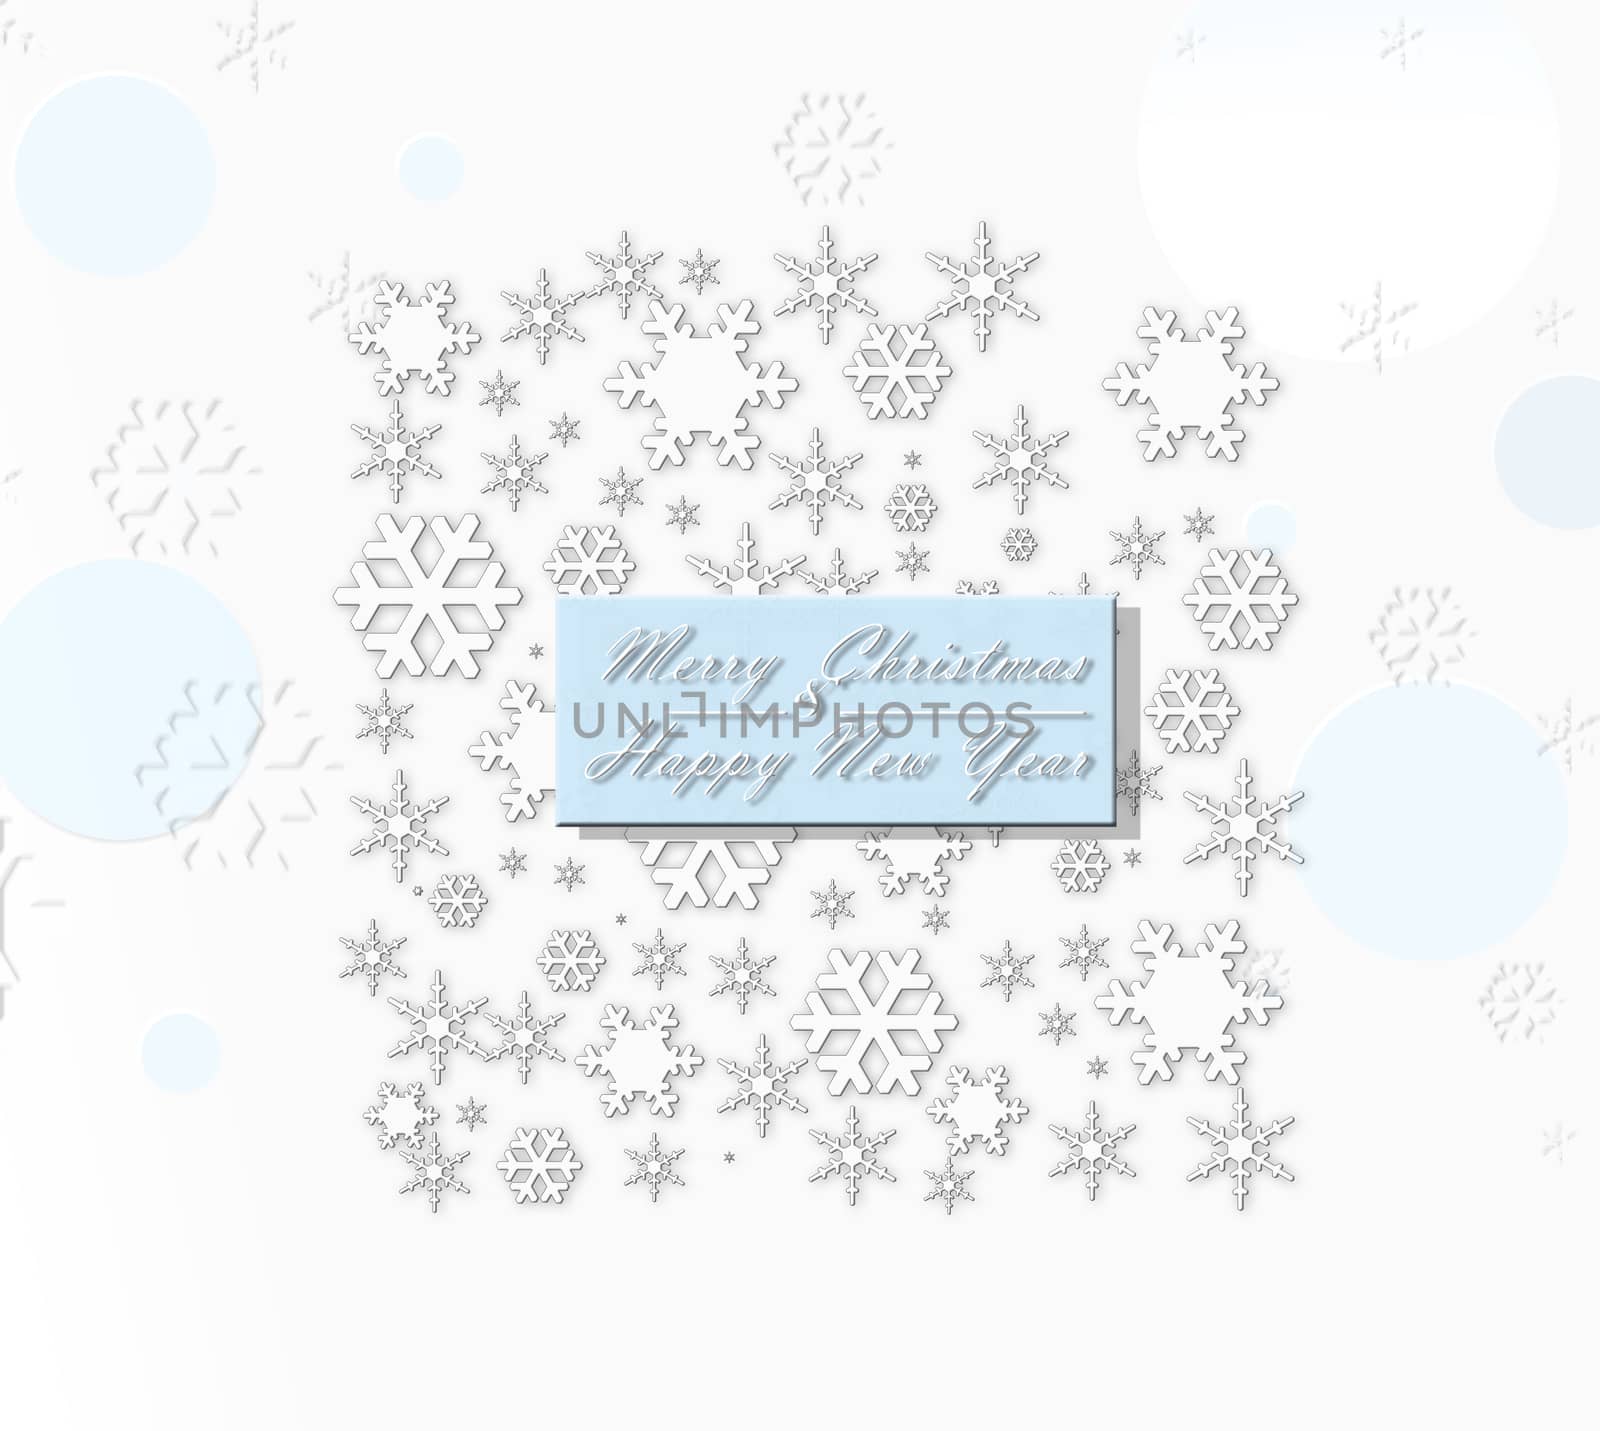 Merry christmas and happy new year silver snowflakes on white background. Elegant Greeting card, invitation, flyer. 3D illustration